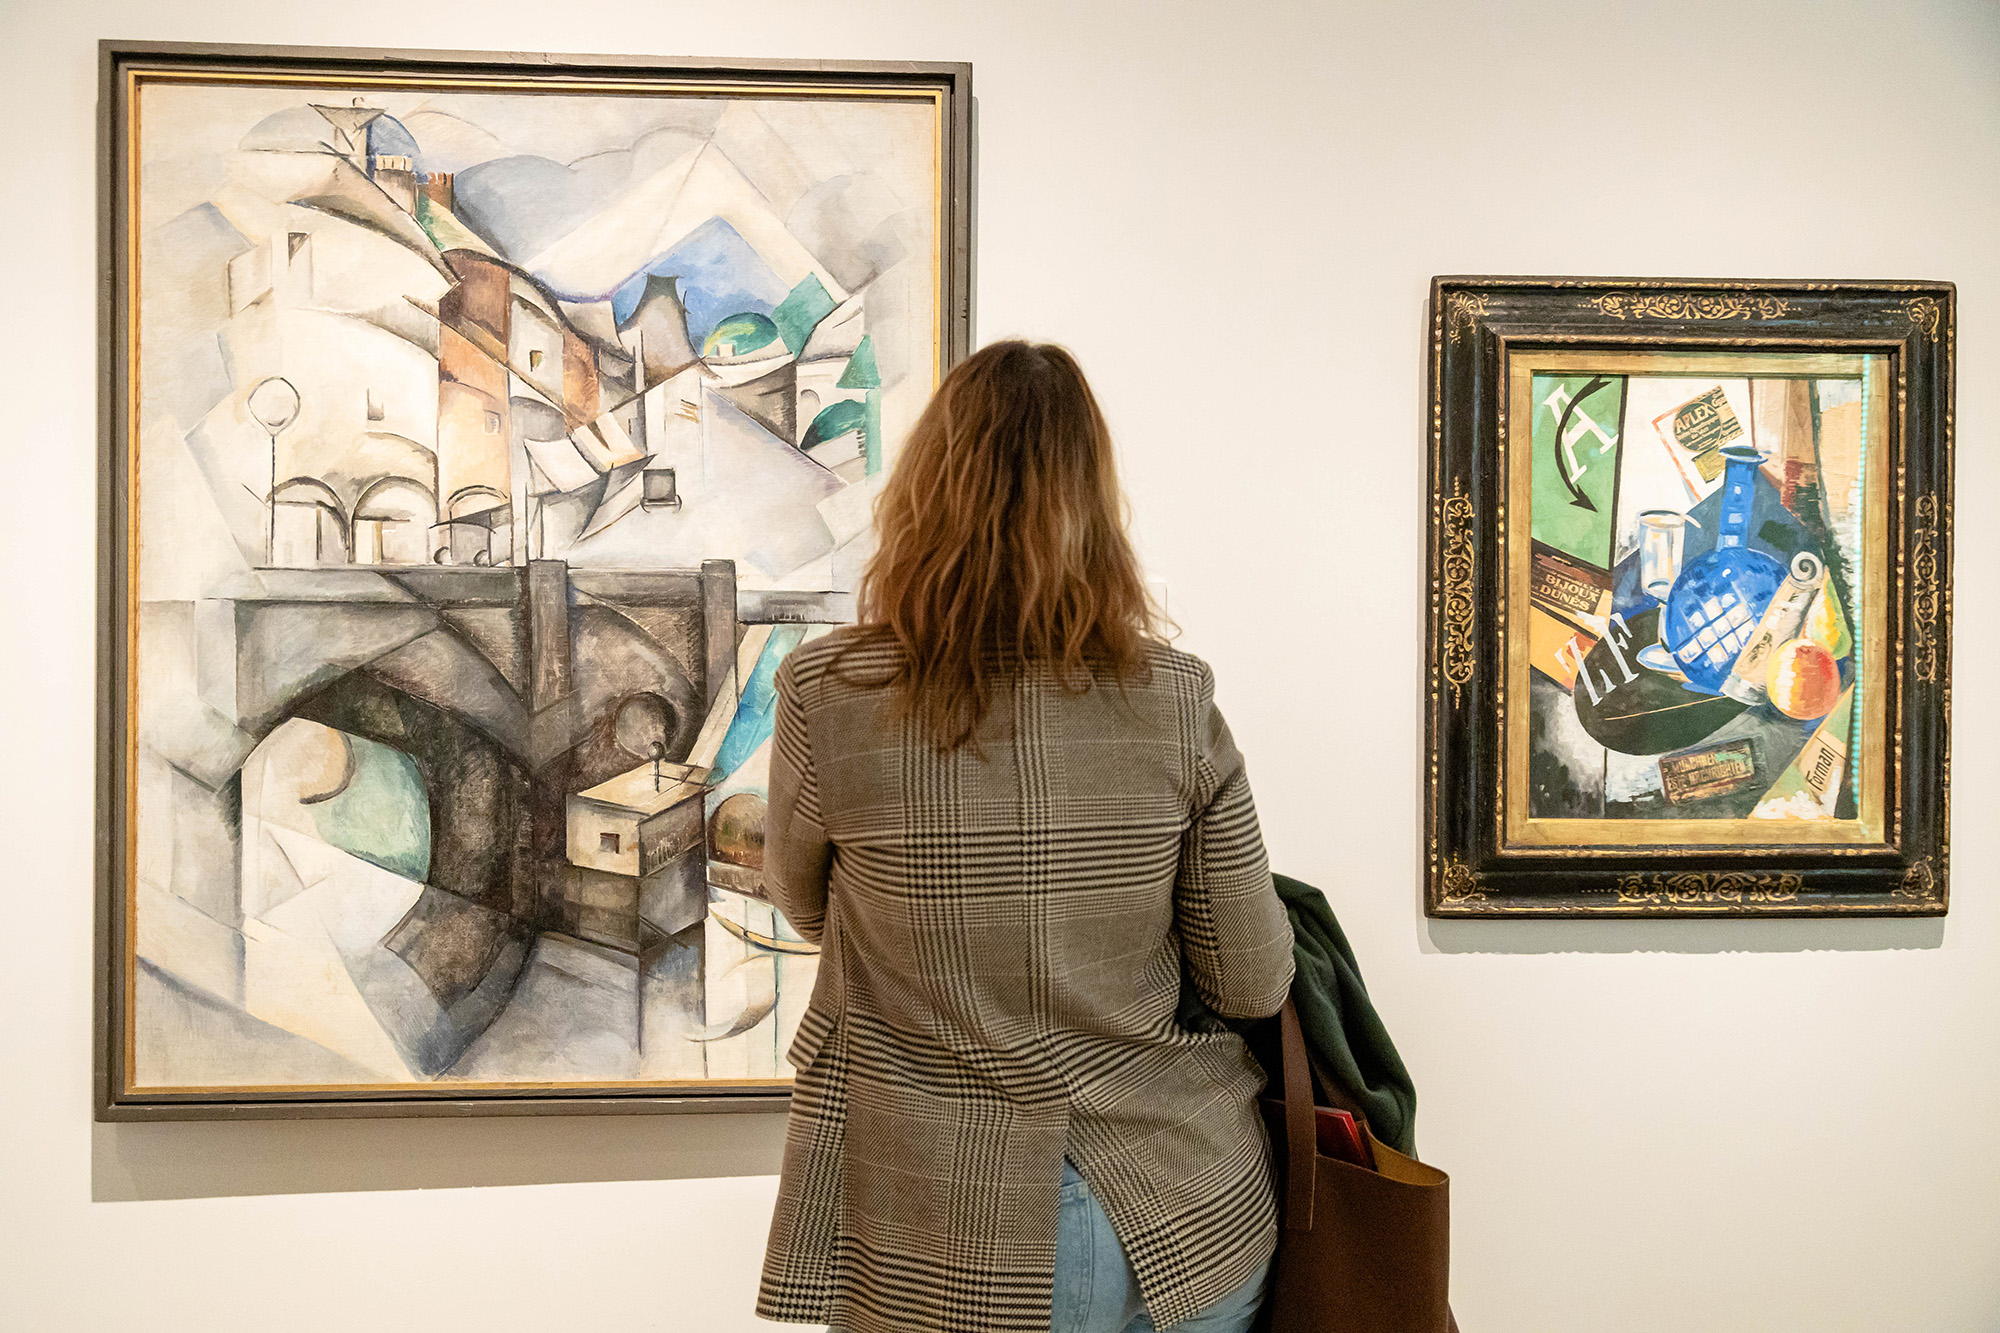  A woman looks at one of the works in the exhibition 'In the Eye of the Storm', at the Museo Nacional Thyssen-Bornemisza, on November 28, in Madrid, Spain.